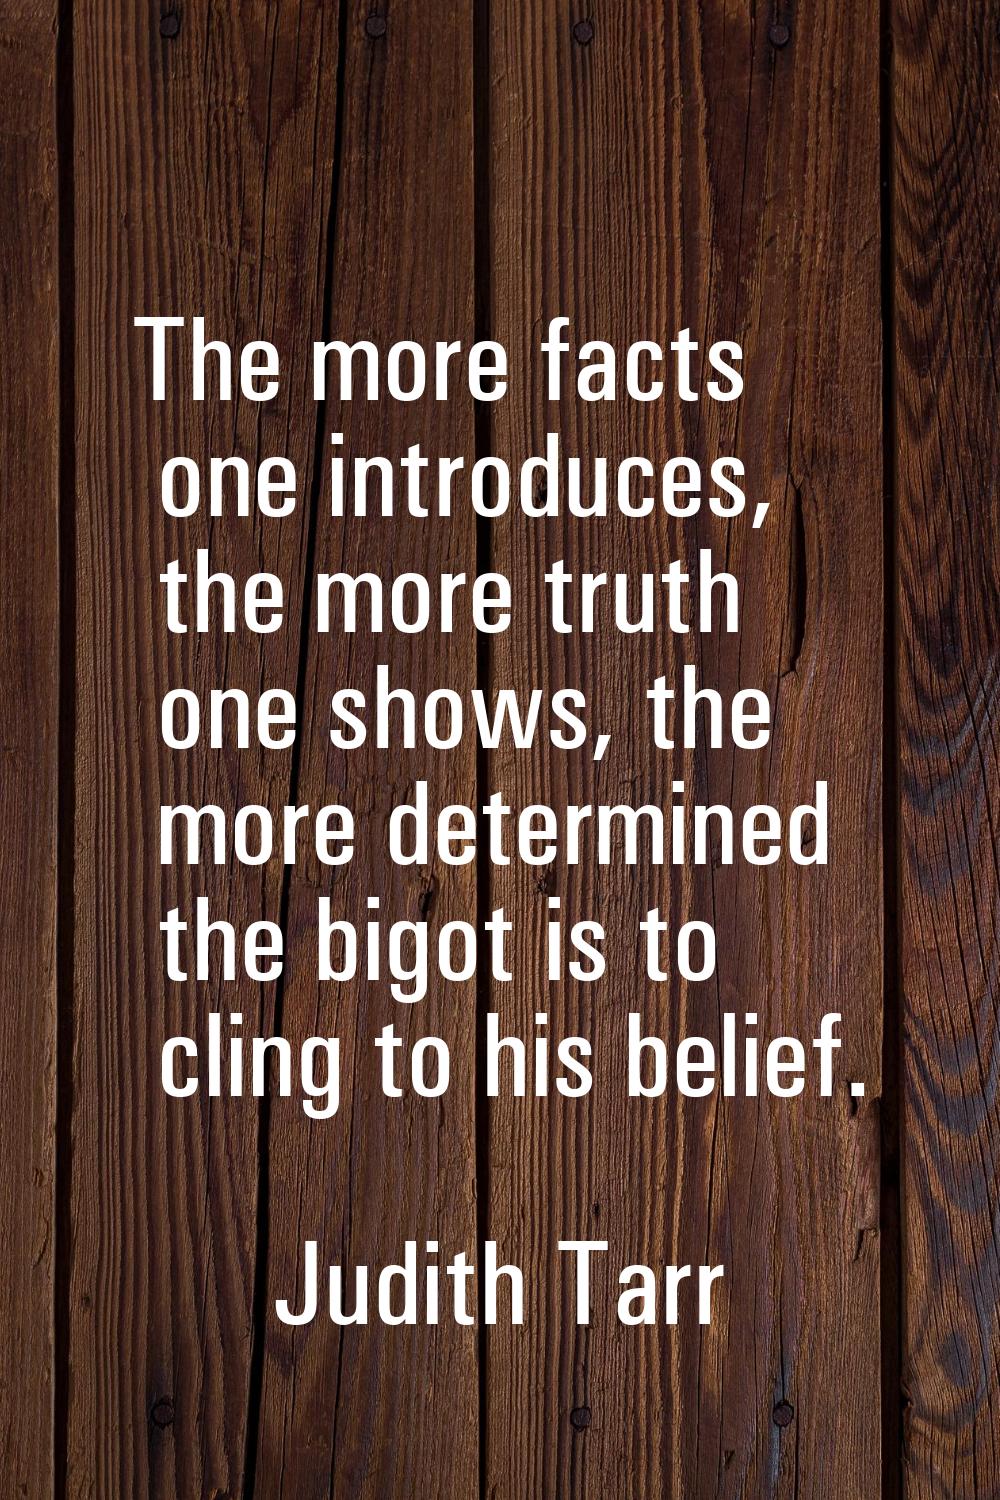 The more facts one introduces, the more truth one shows, the more determined the bigot is to cling 